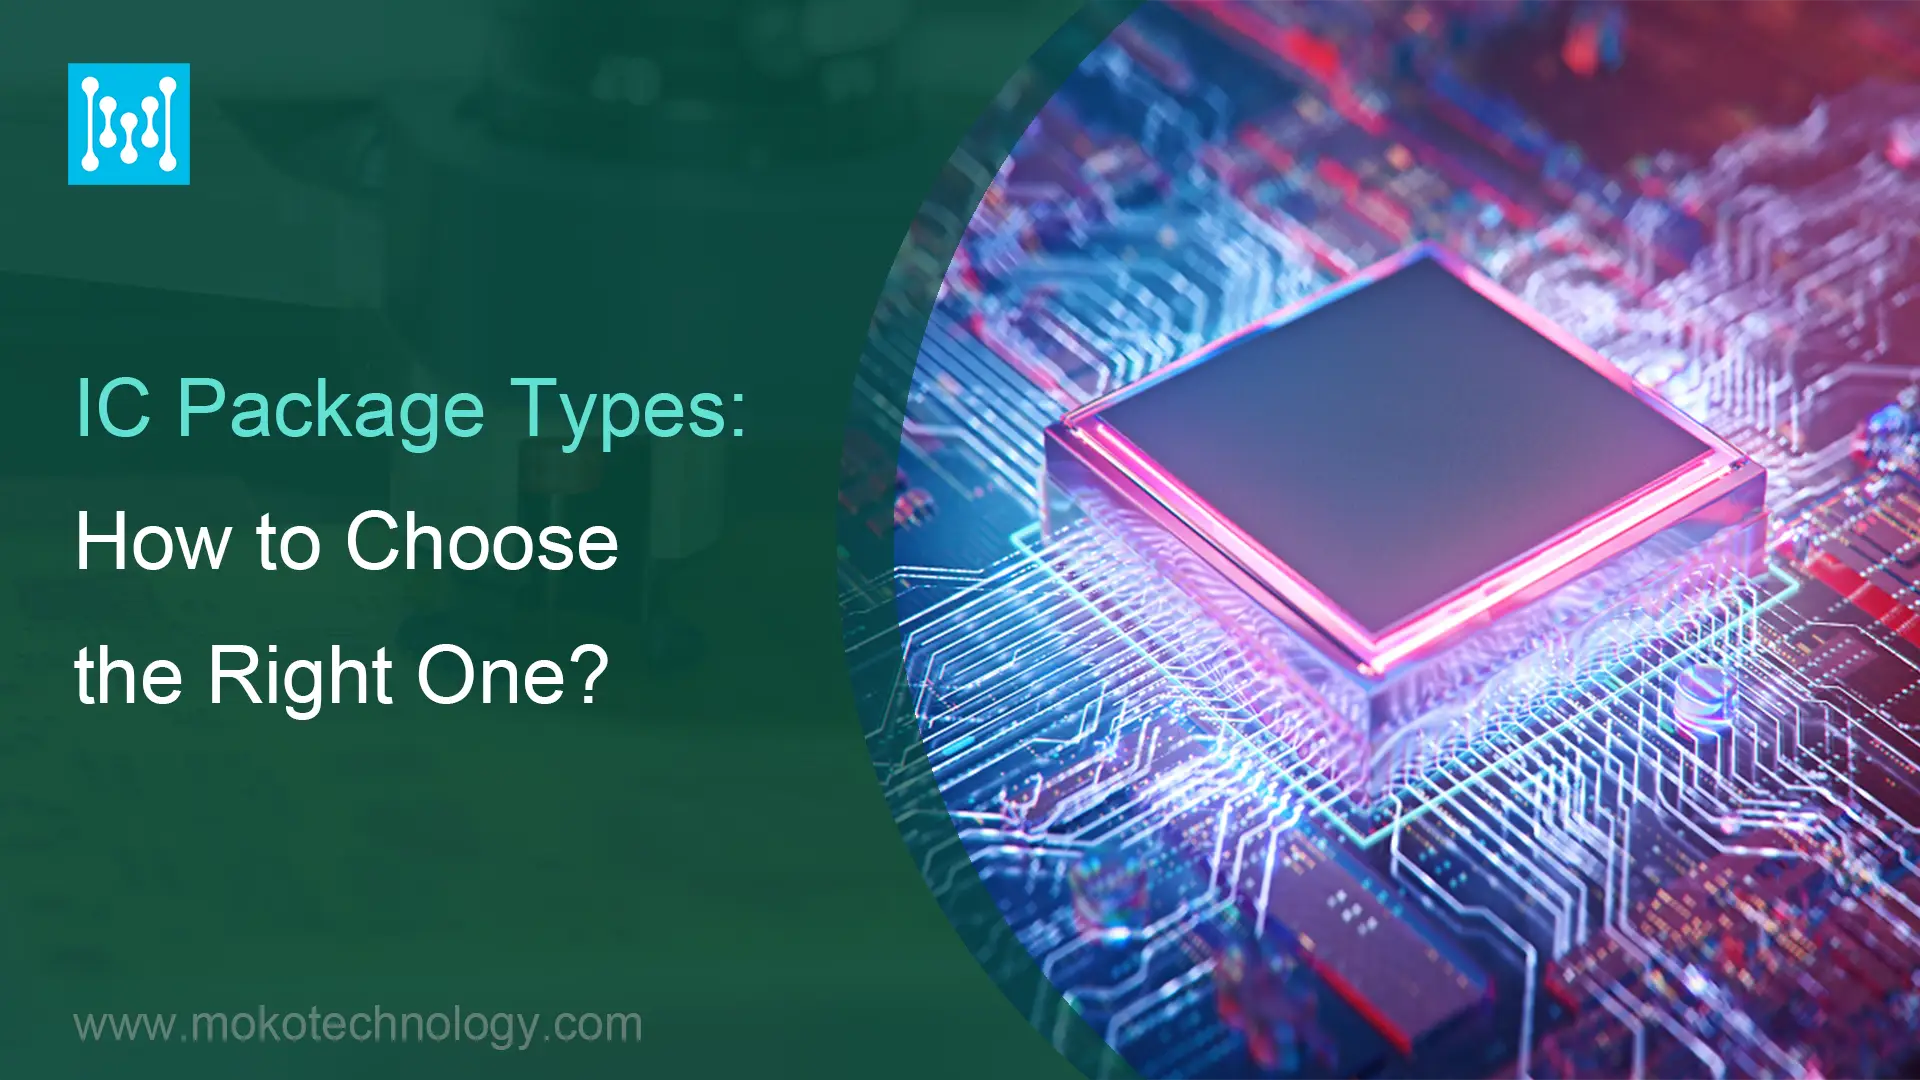 IC Package Types: How to Choose the Right One?